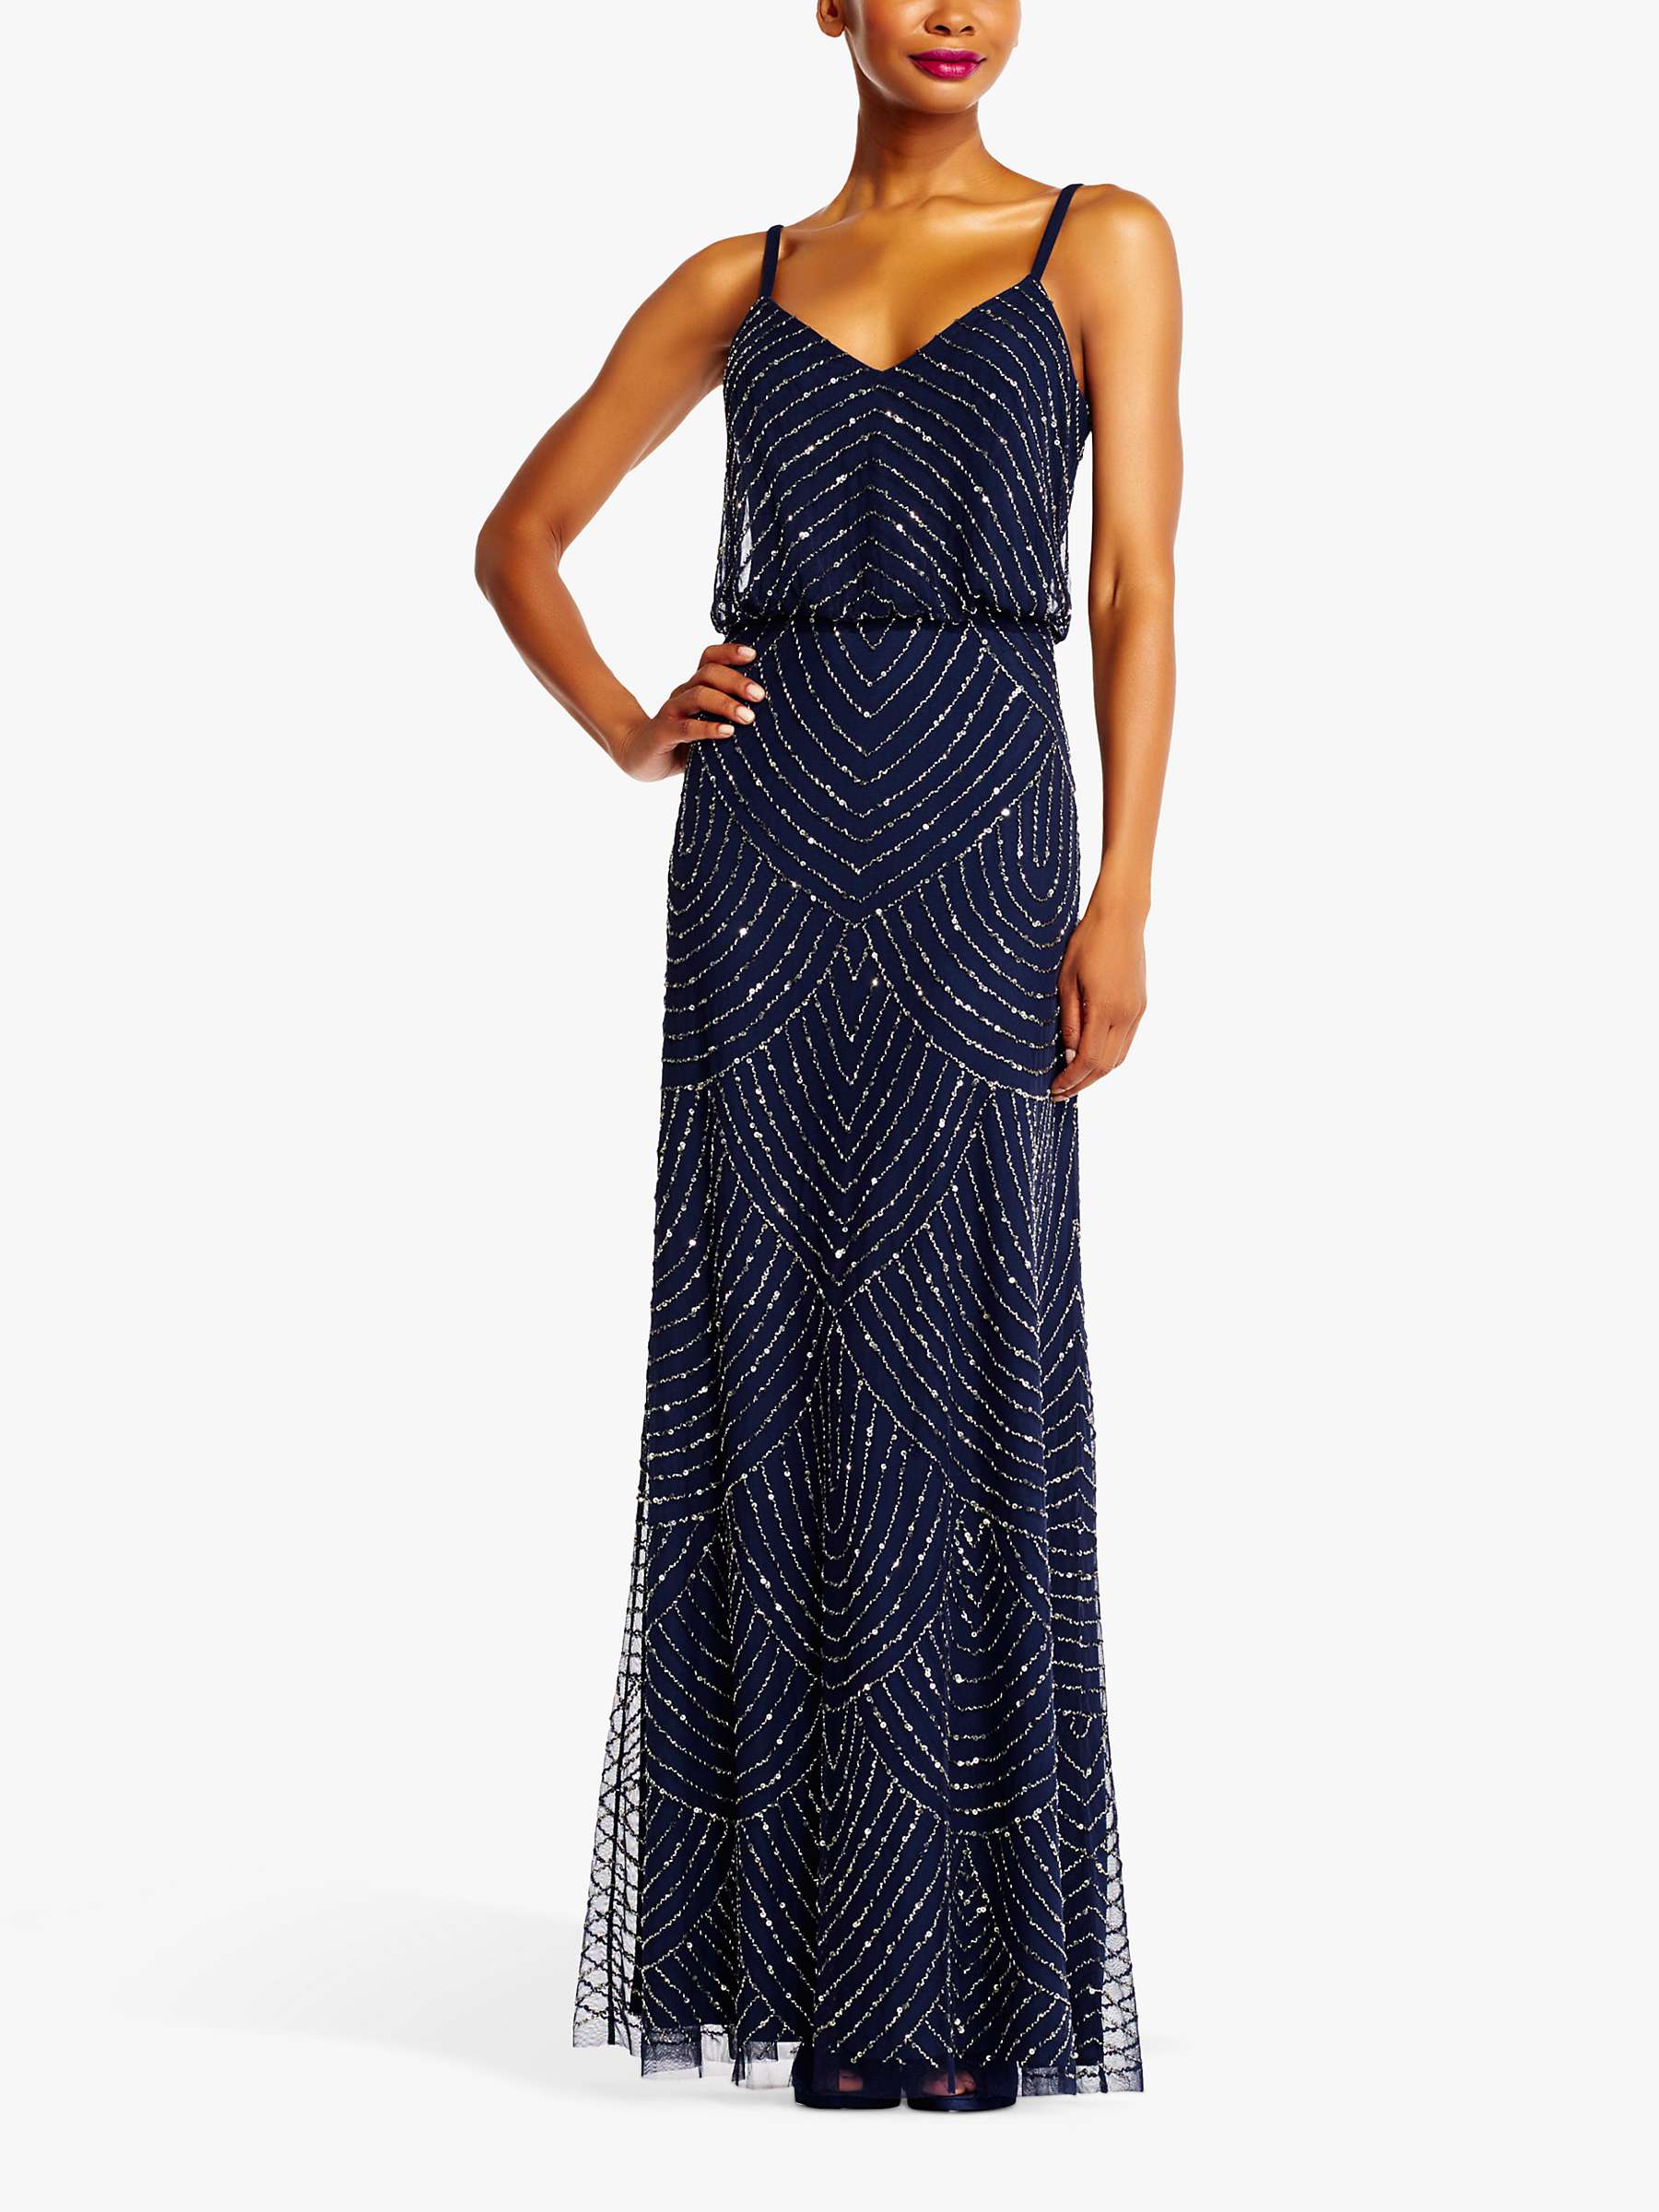 Buy Adrianna Papell Scallop Bead Spaghetti Strap Maxi Dress, Navy Online at johnlewis.com